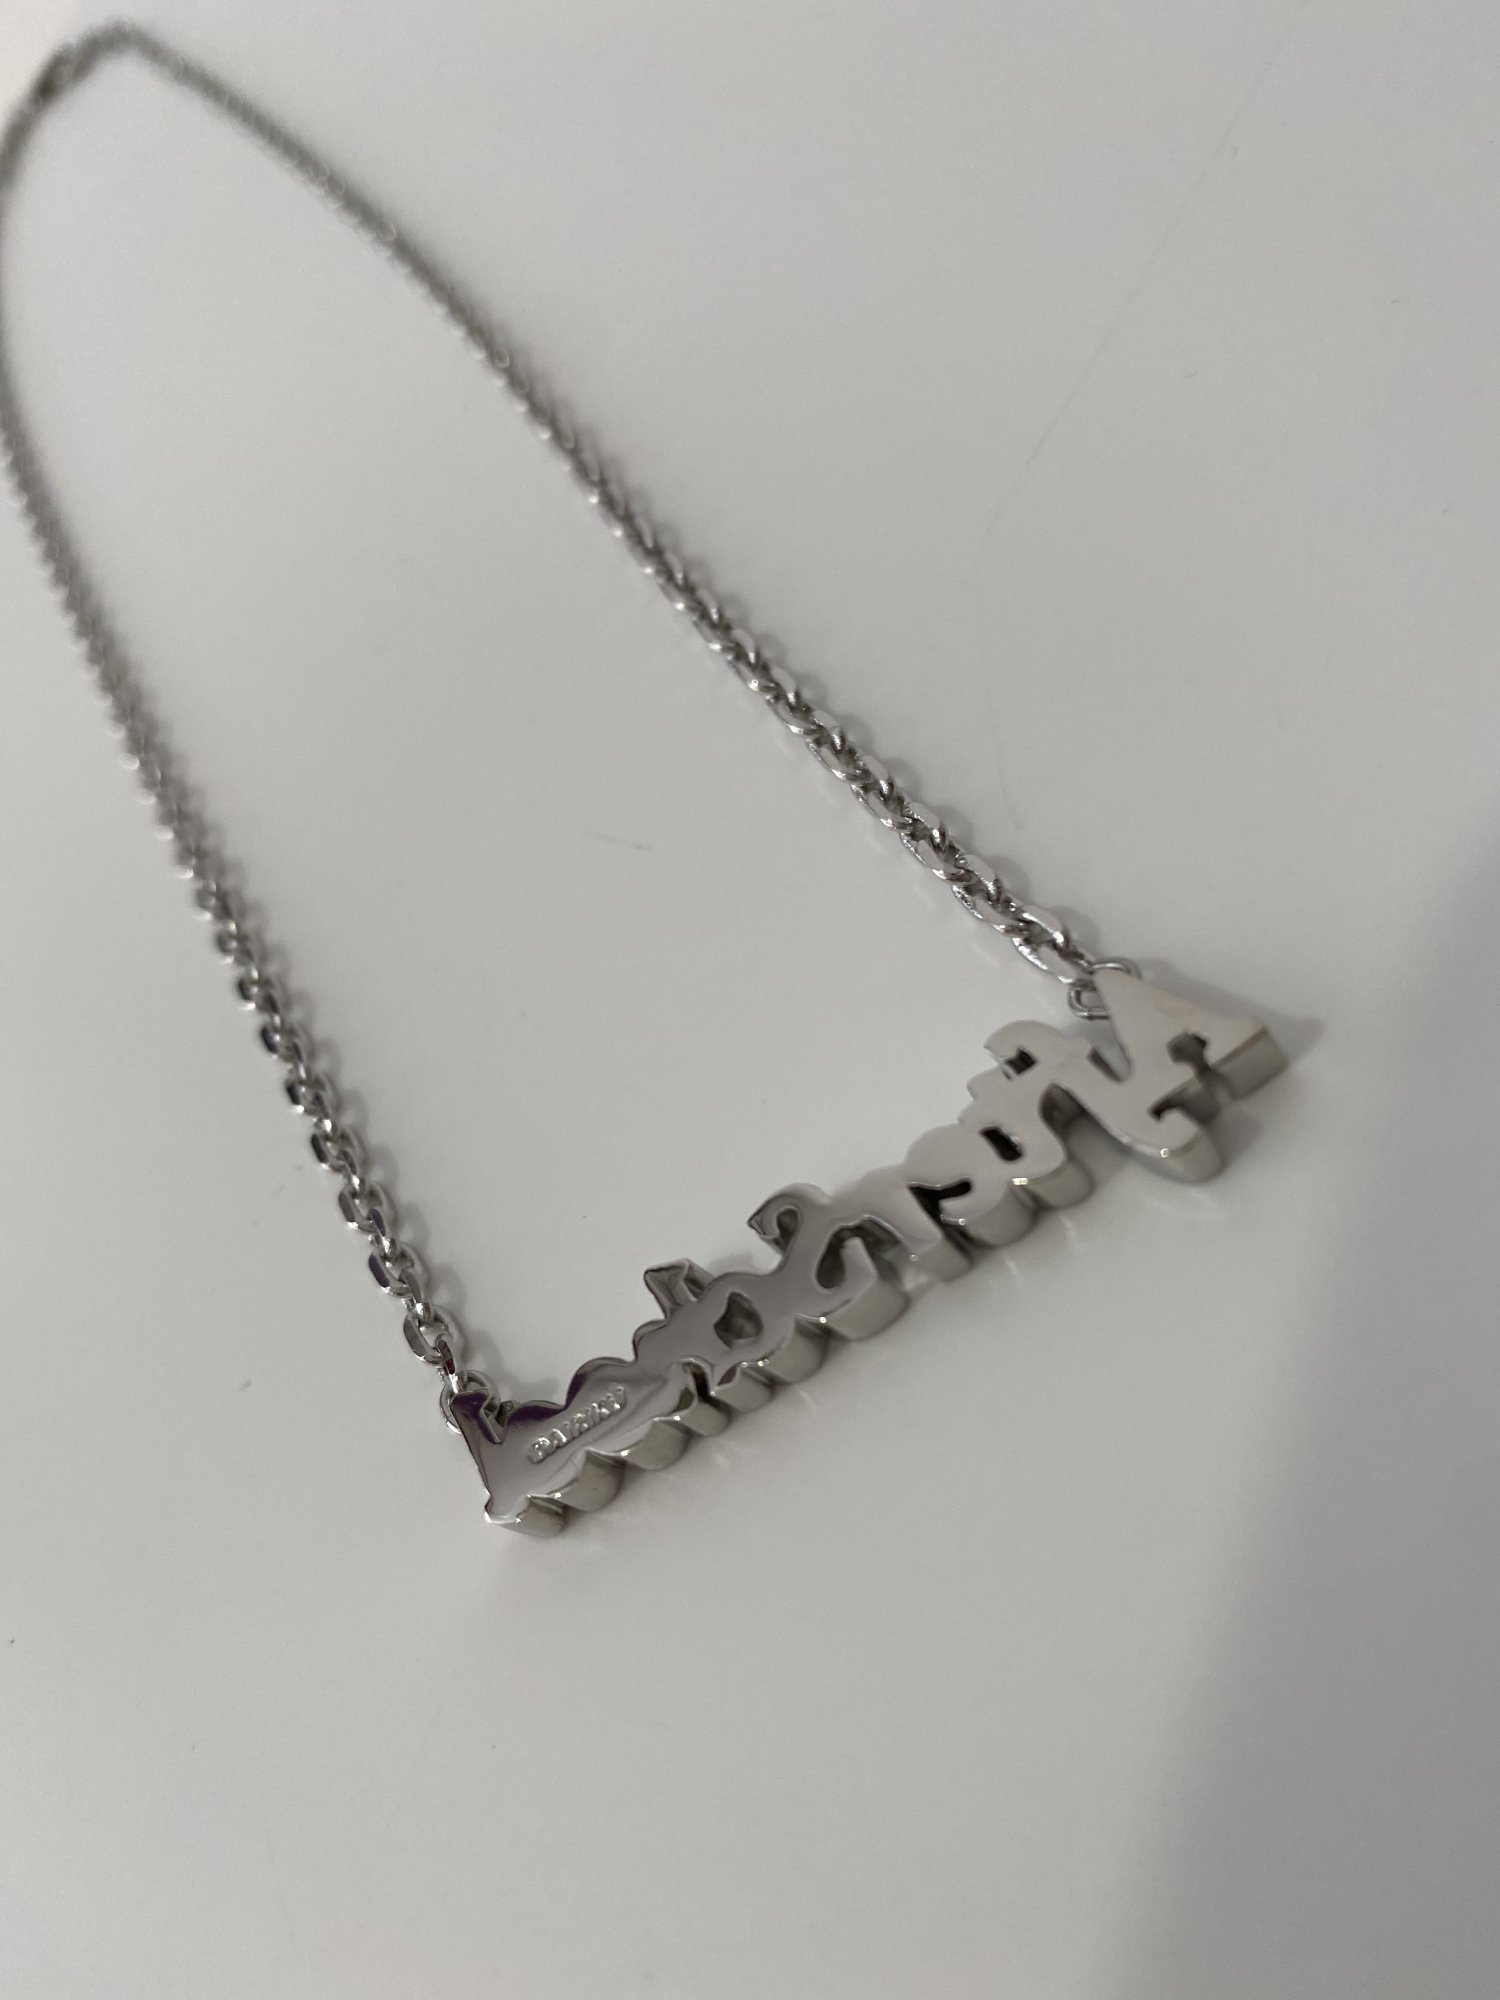 DAIRIKU<br />After School Necklace<img class='new_mark_img2' src='https://img.shop-pro.jp/img/new/icons14.gif' style='border:none;display:inline;margin:0px;padding:0px;width:auto;' />